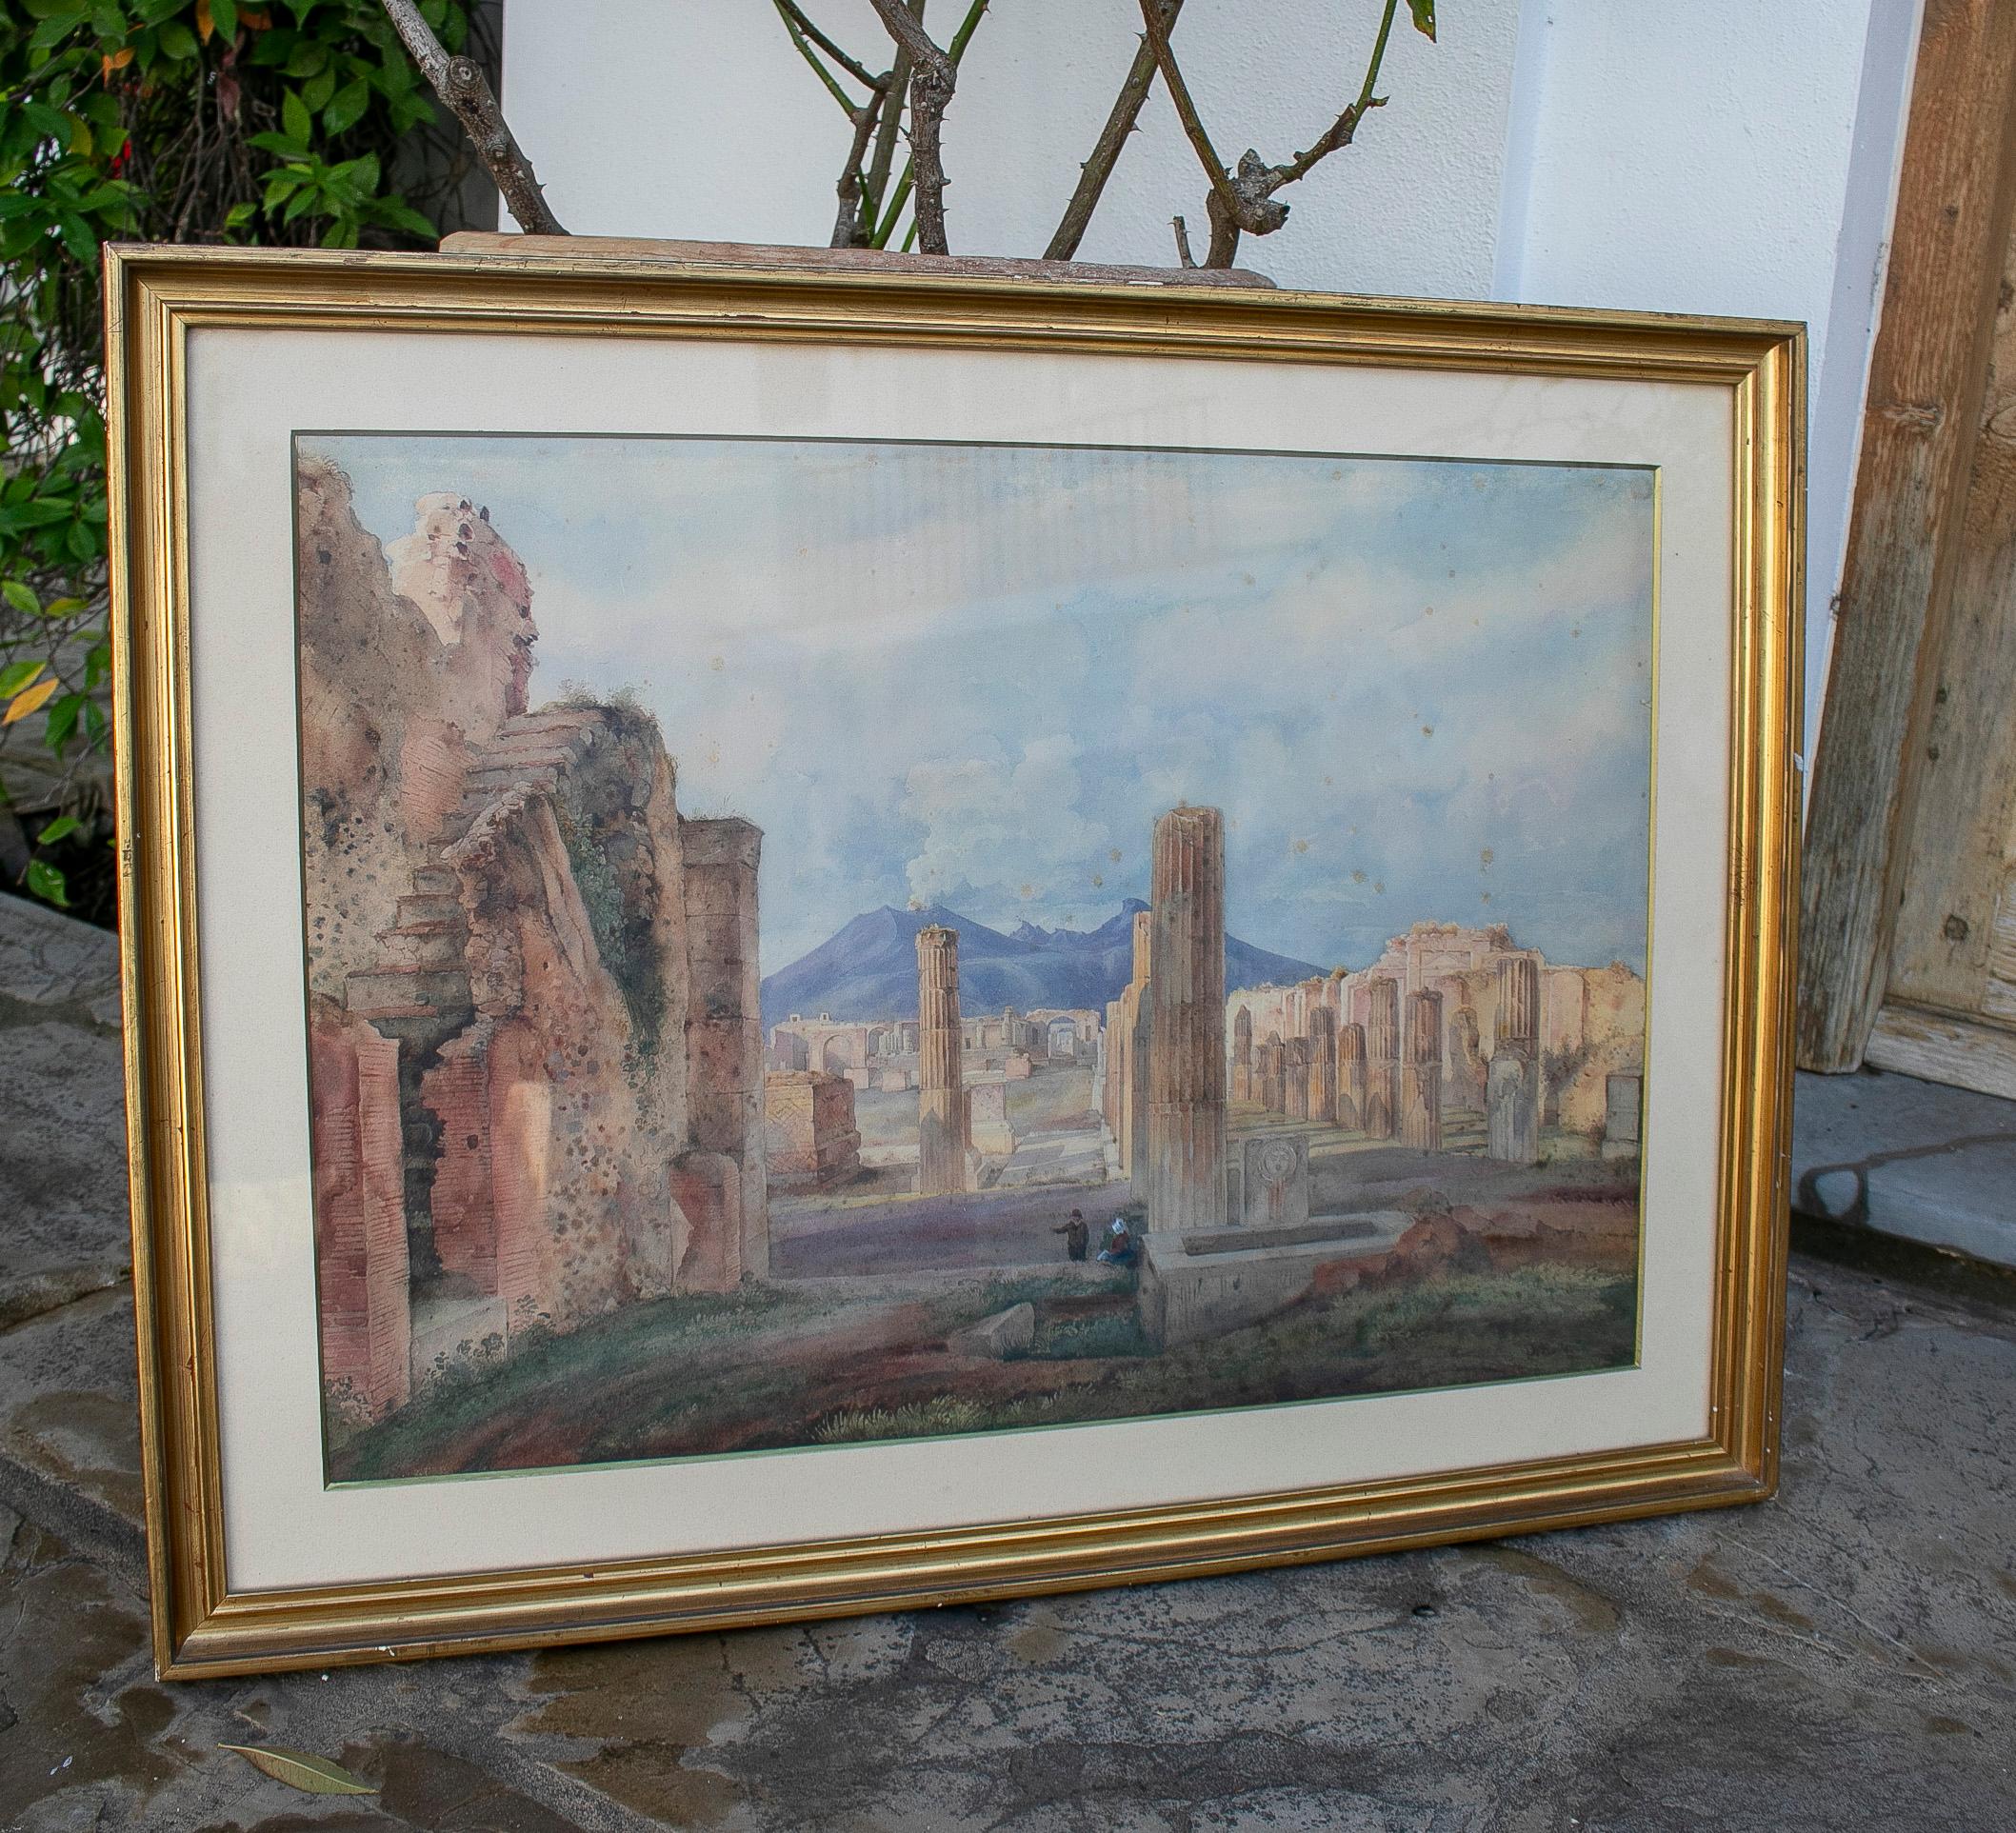 Antique 19th century Pompeii landscape Grand Tour watercolour with mount Vesuvious in the background. 

It was customary for European noble to visit Italy with its classical and renaissance excellence. 

Measures with frame: 63 x 82 x 3cm.